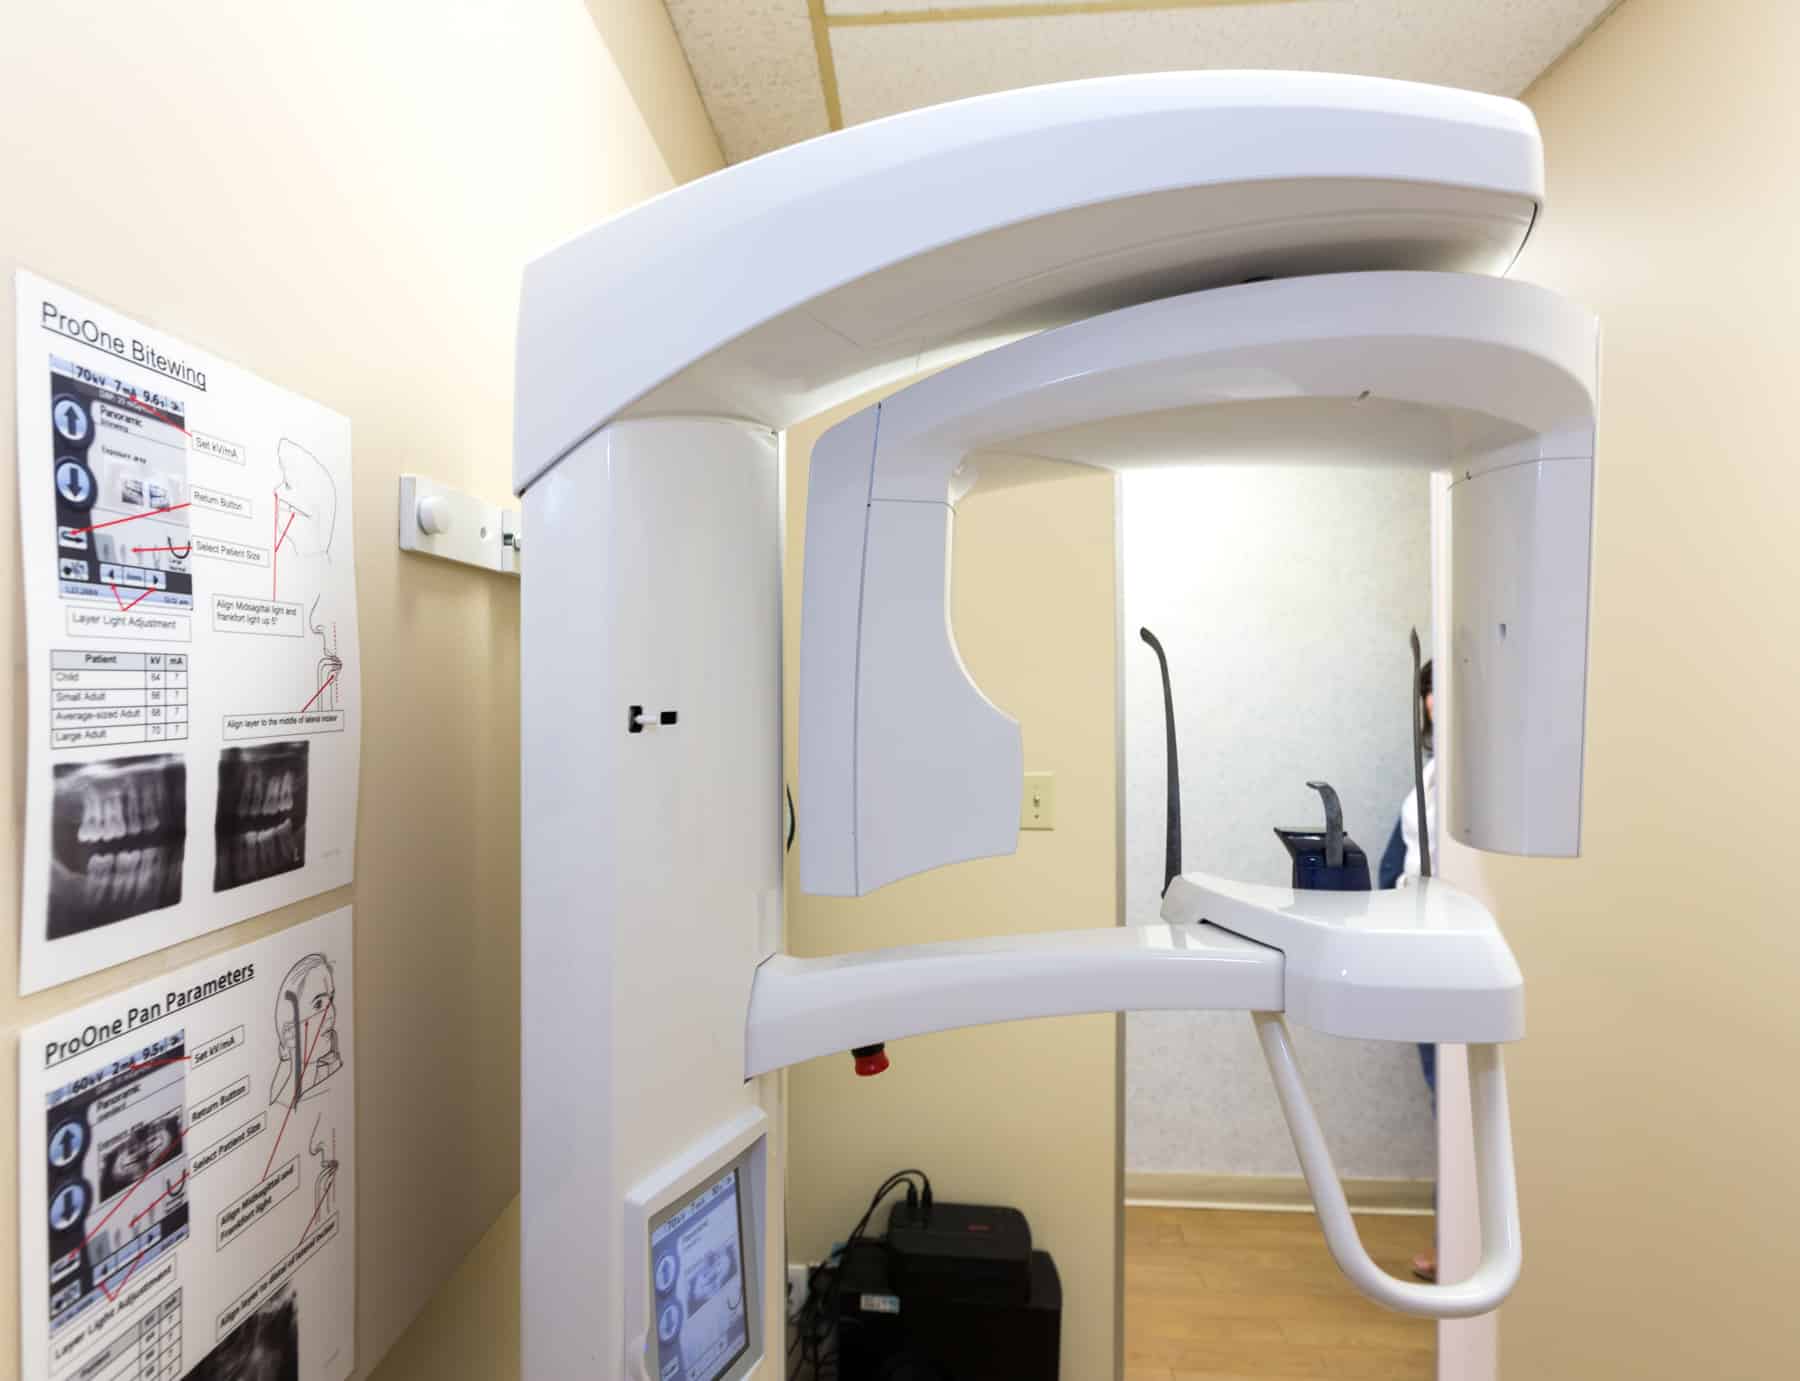 Large piece of dental technology from floor to ceiling used for advanced dental x rays sitting in a dental office with papers on the wall